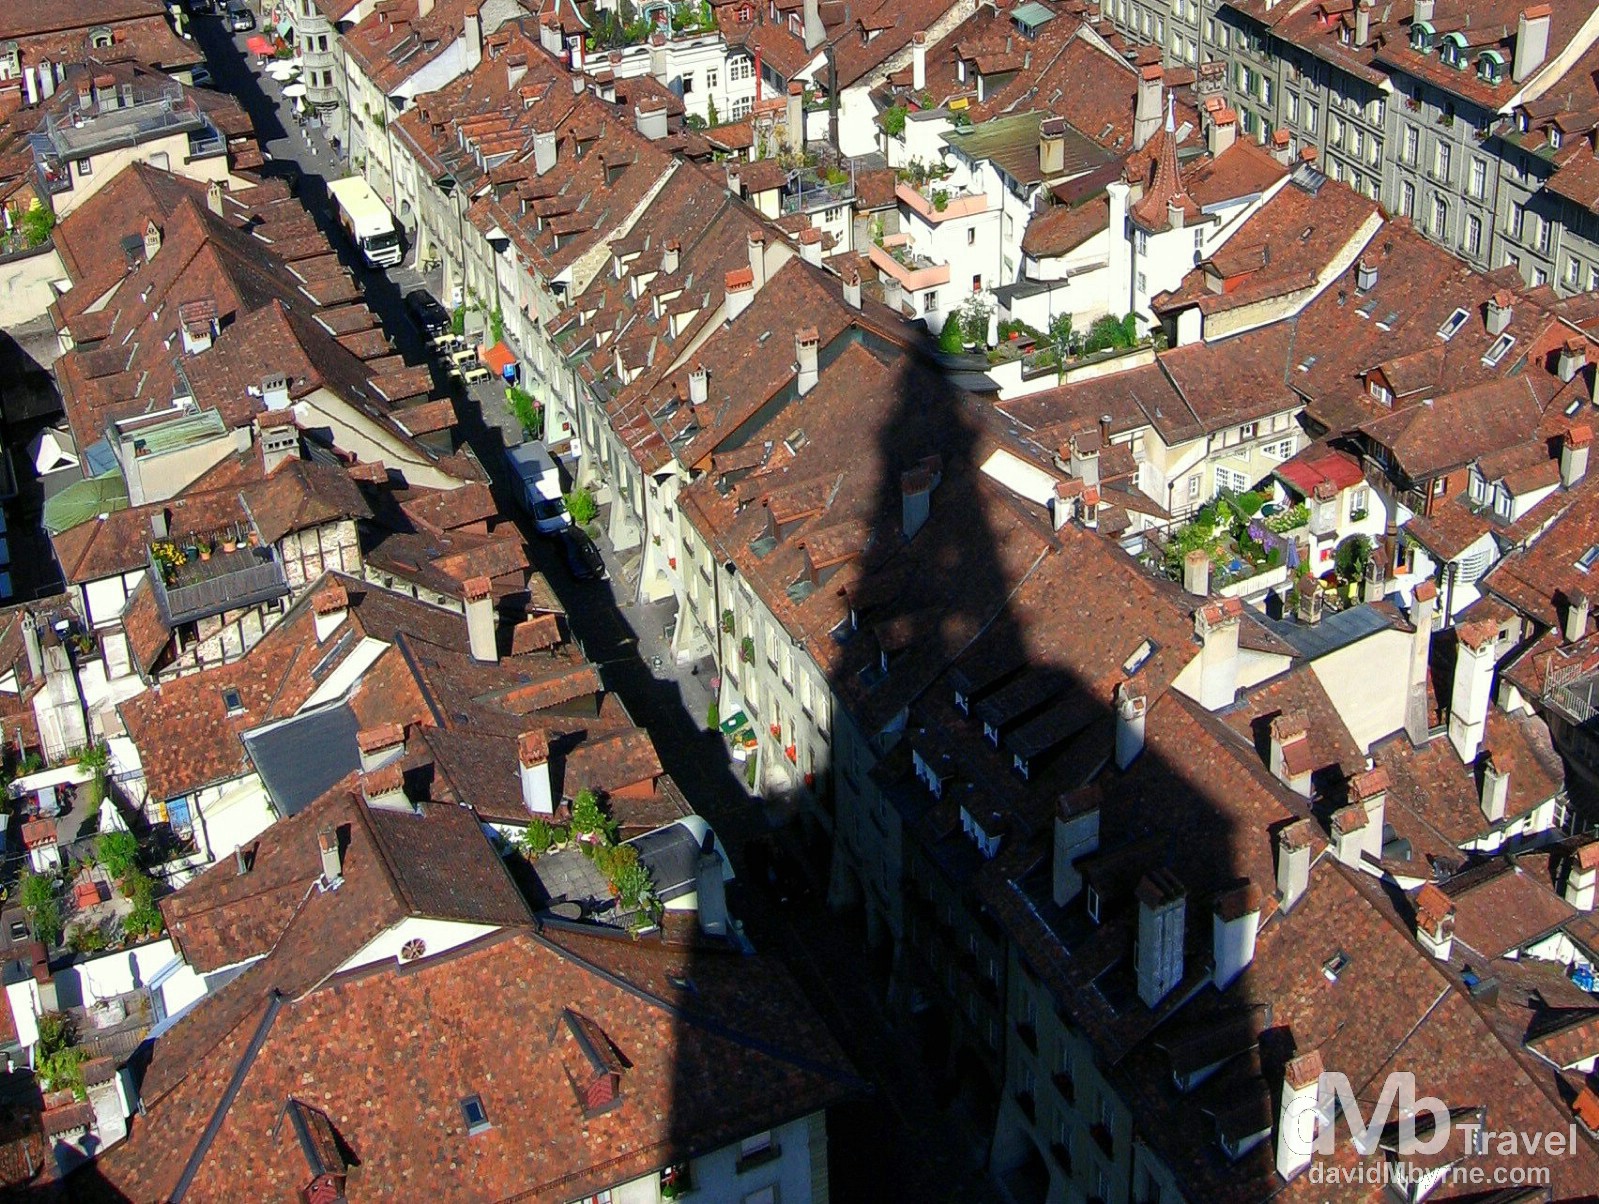 The spire of the late-Gothic Cathedral, or Münster, casts a shadow over the roofs of Old Town in Bern, Switzerland. August 24th, 2007.